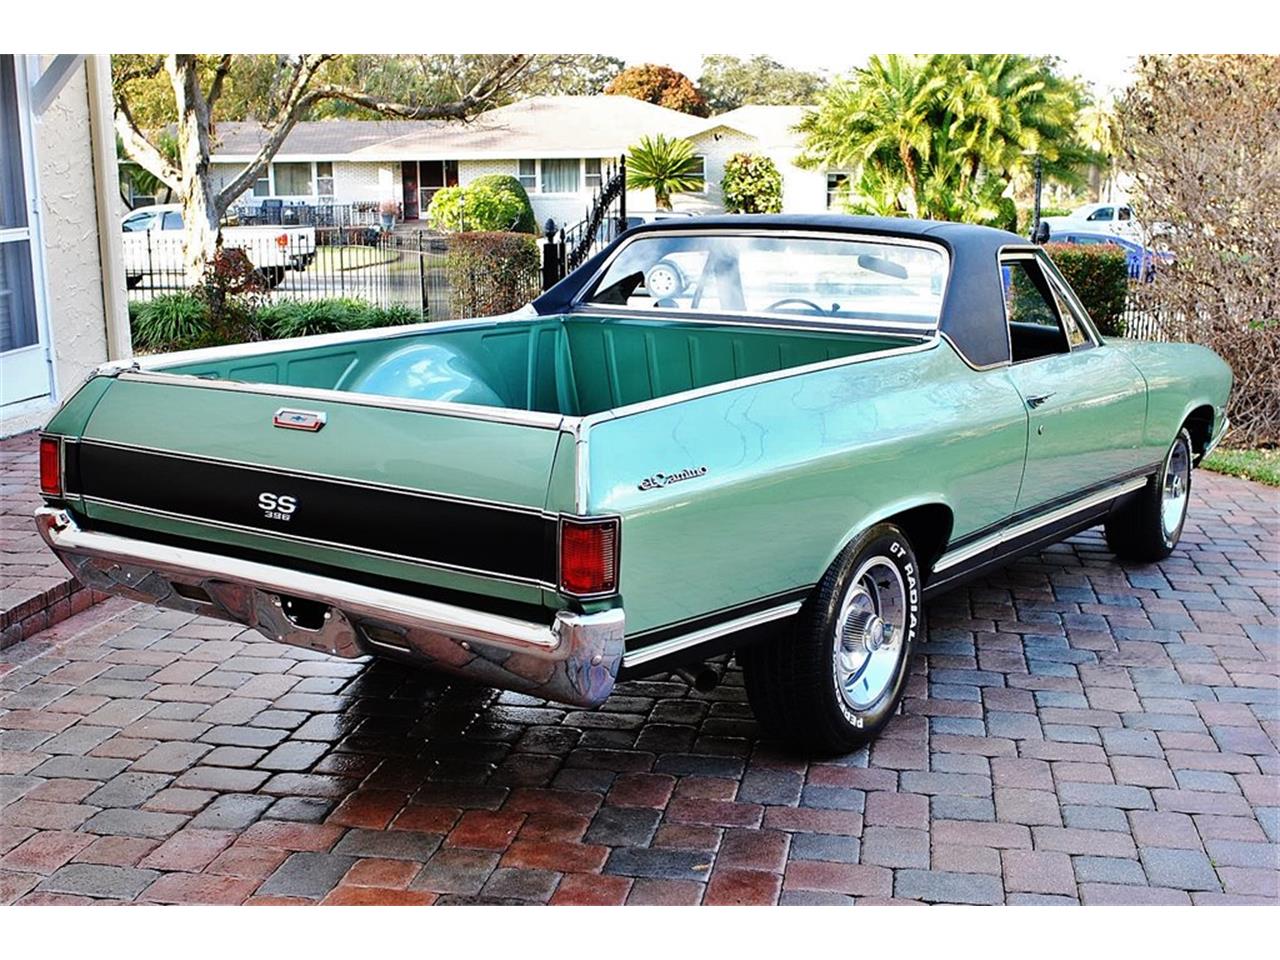 1968 el camino tailgate weight limit